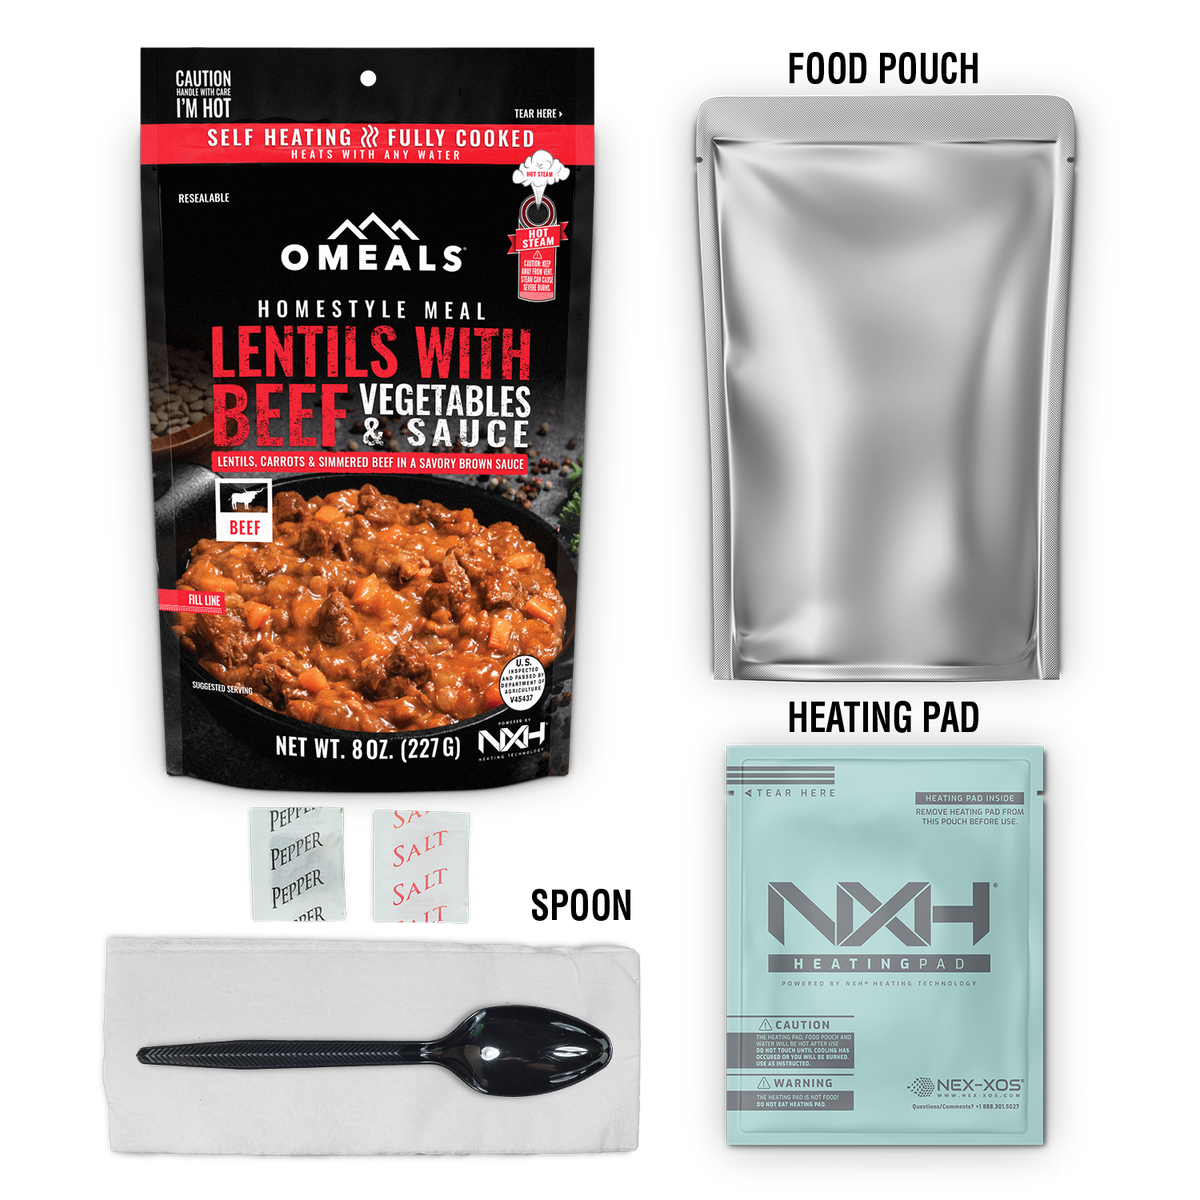 OMEALS® Lentils with Beef